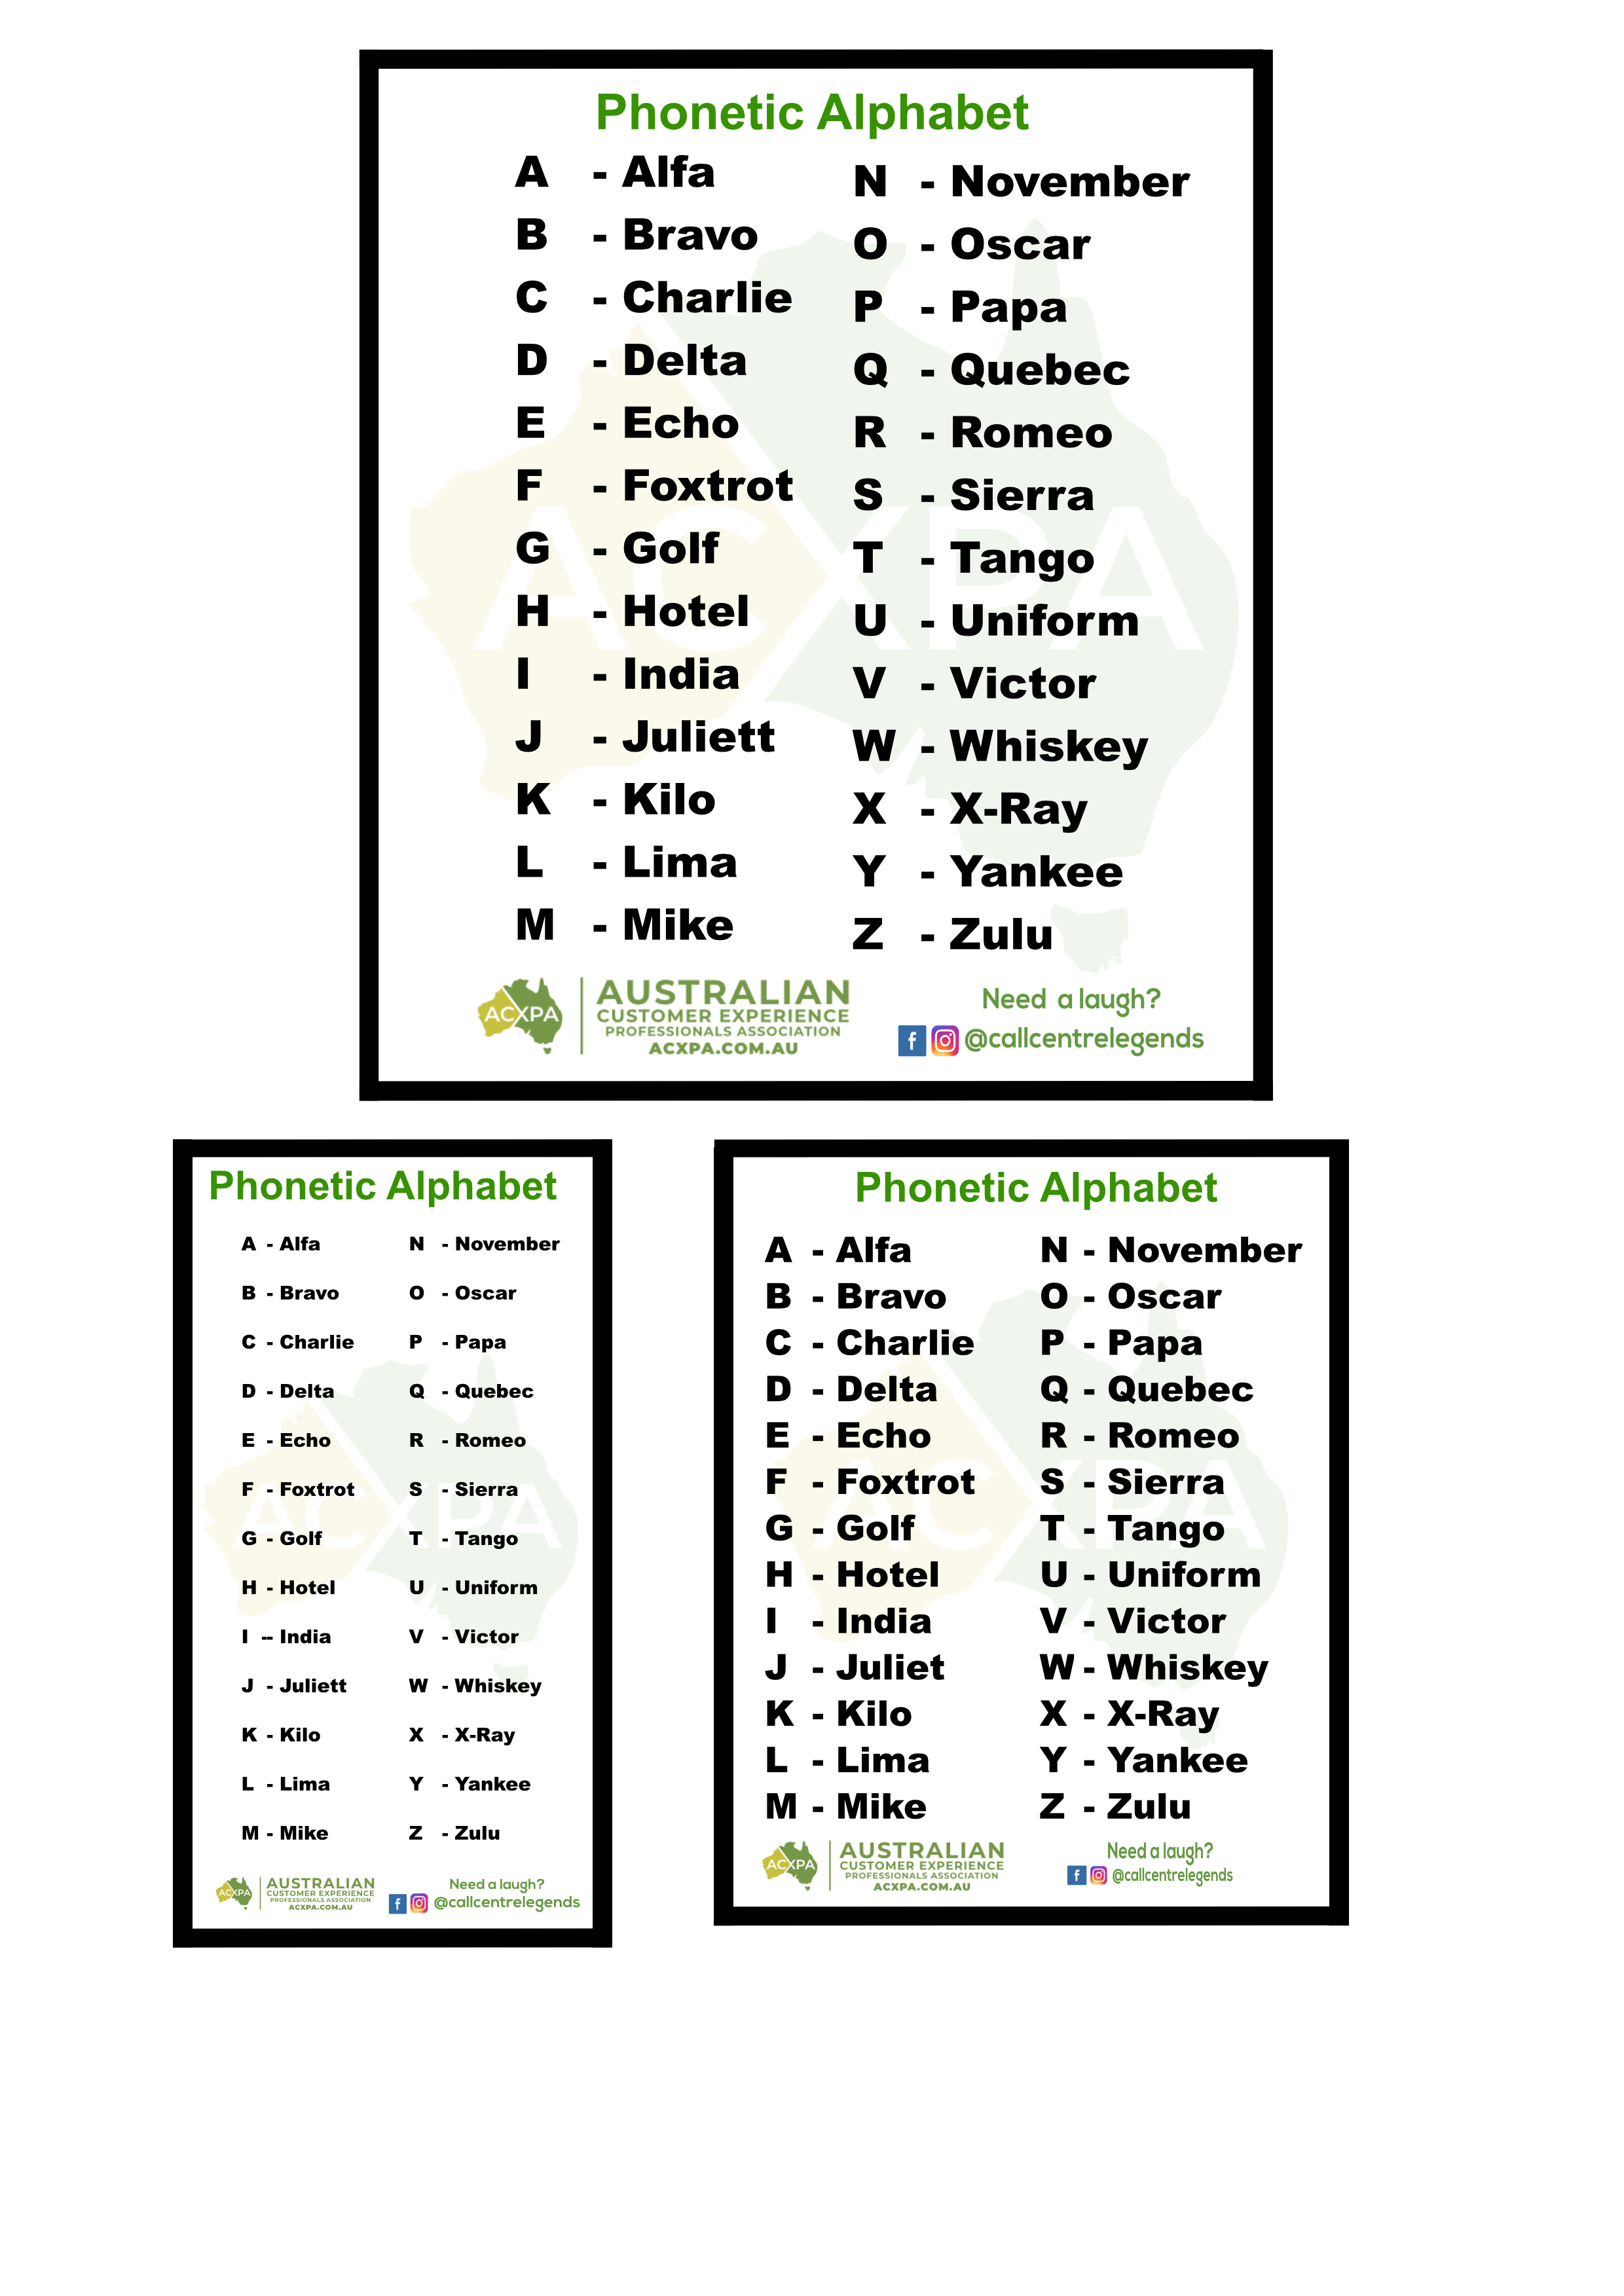 Phonetic Alphabet printable guide A4